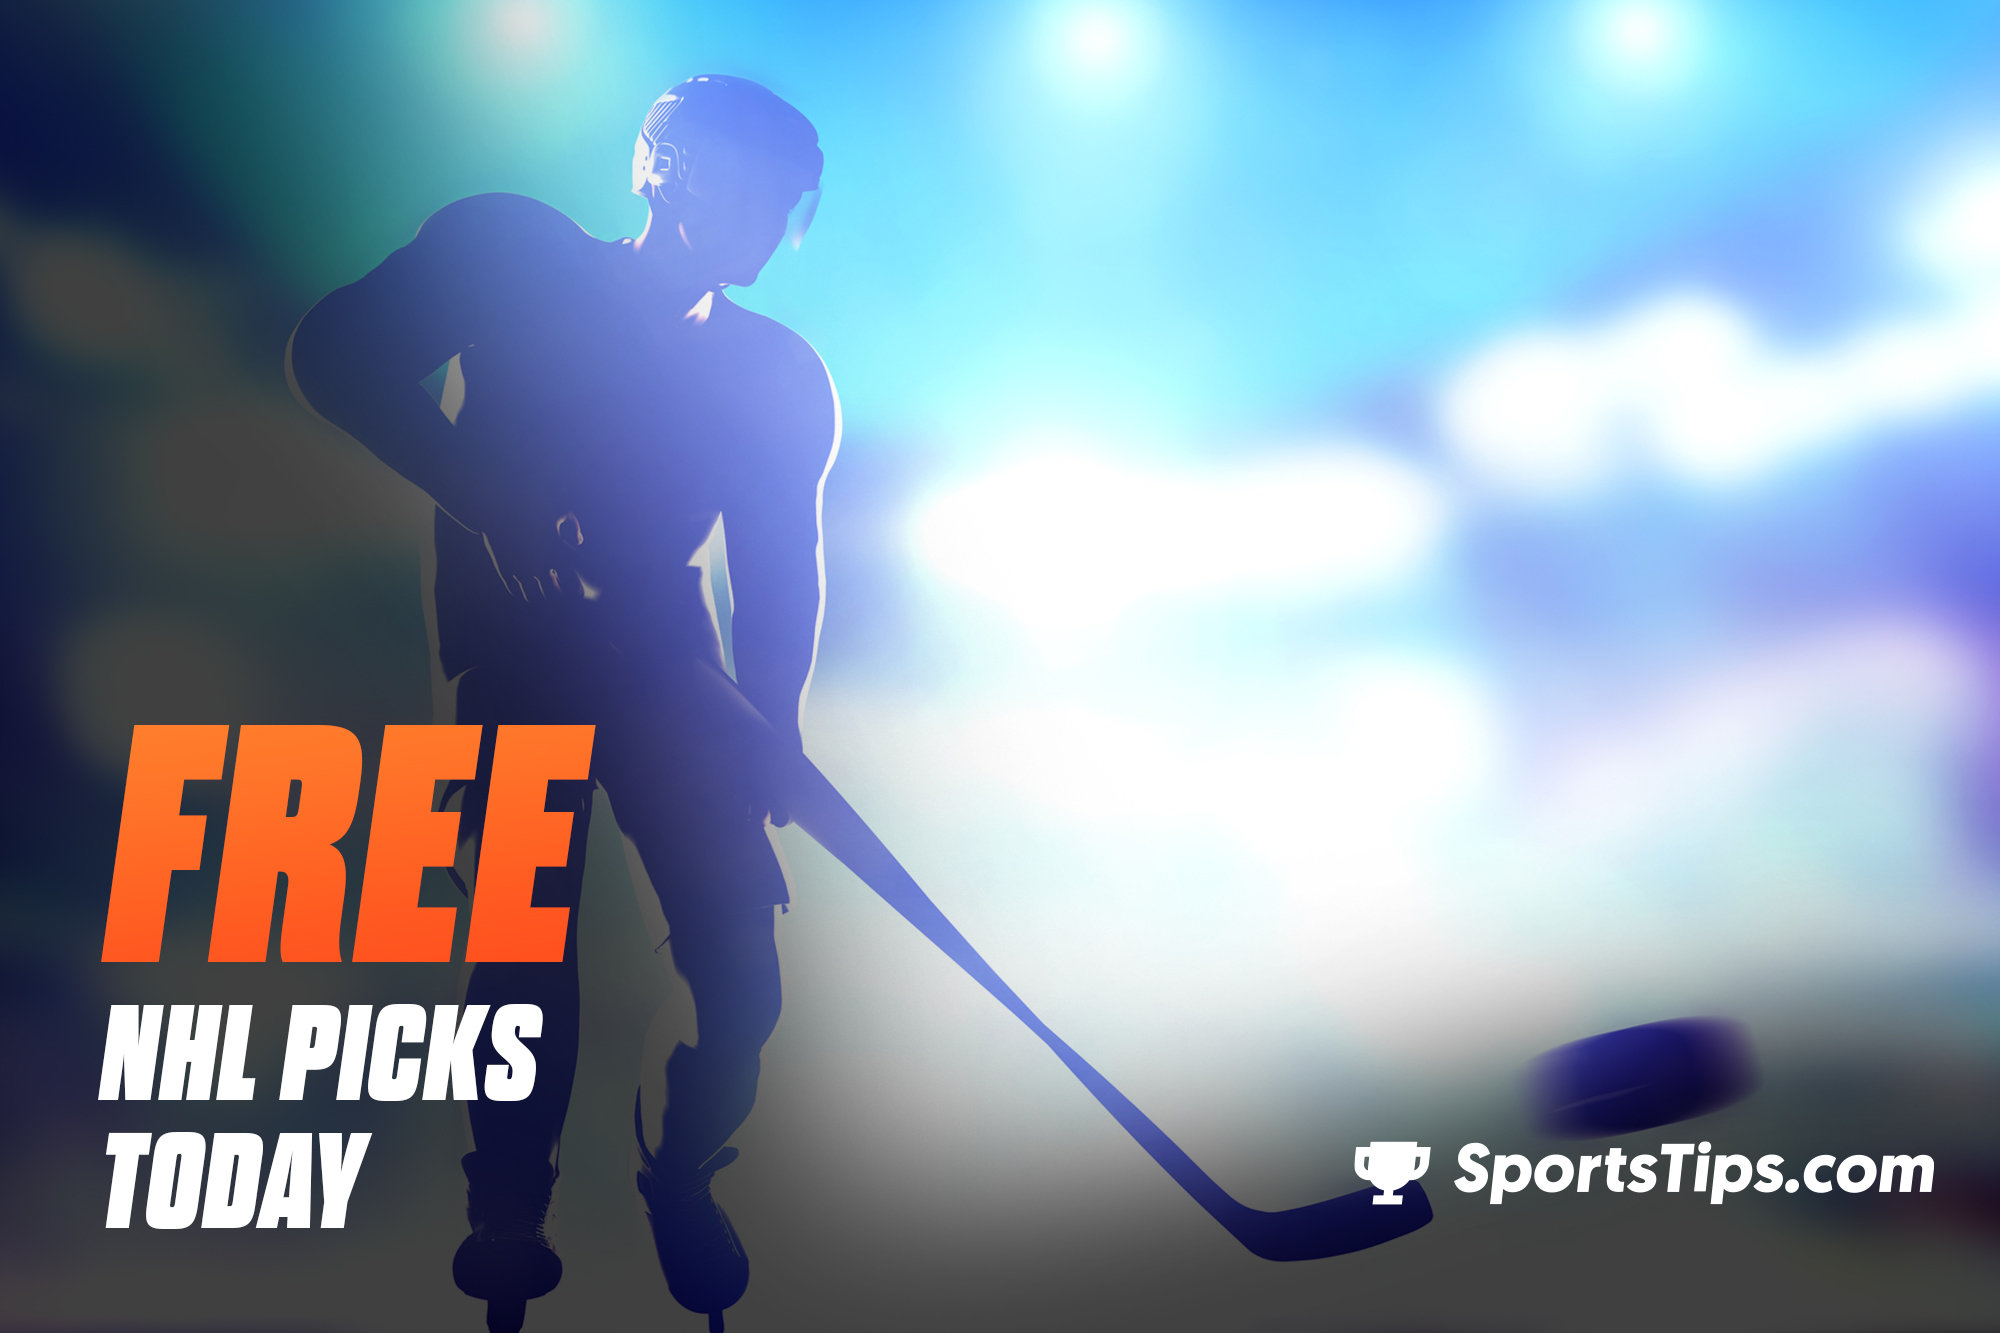 Free NHL Picks Today for Thursday, March 4th, 2021